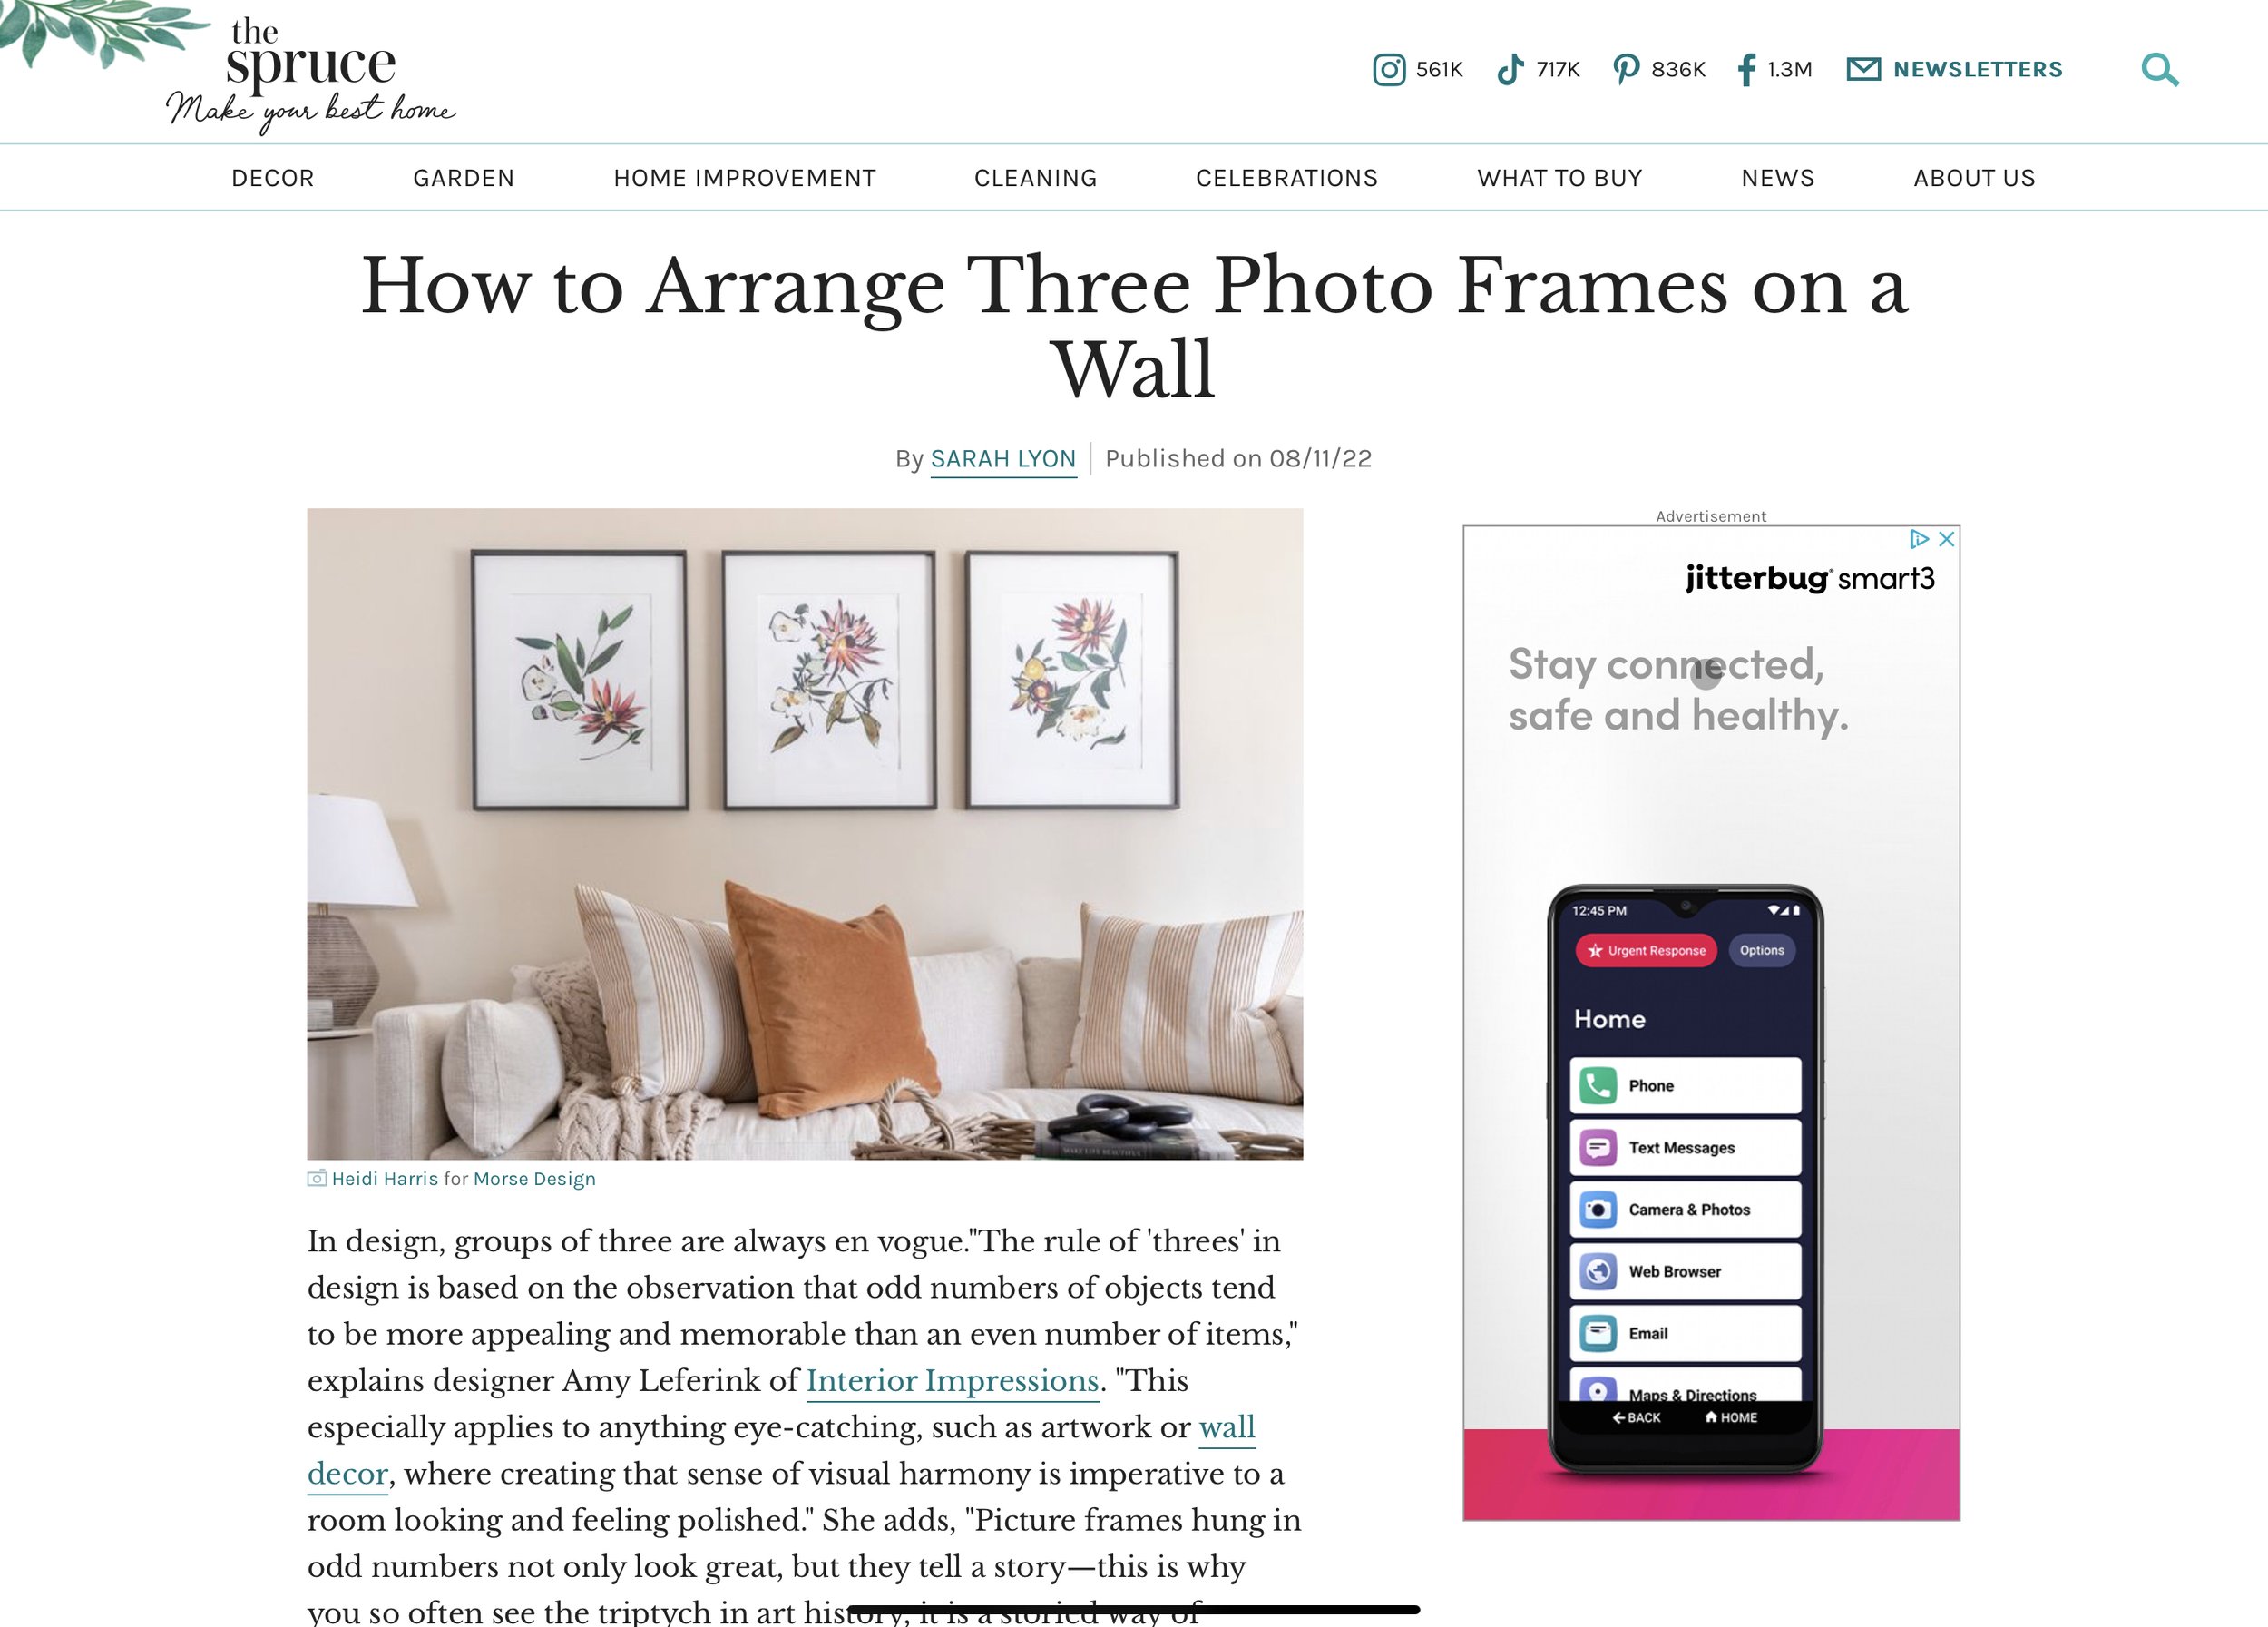 roomLift co-founder Megan Hersch gives advice on how to arrange photo frames in The Spruce